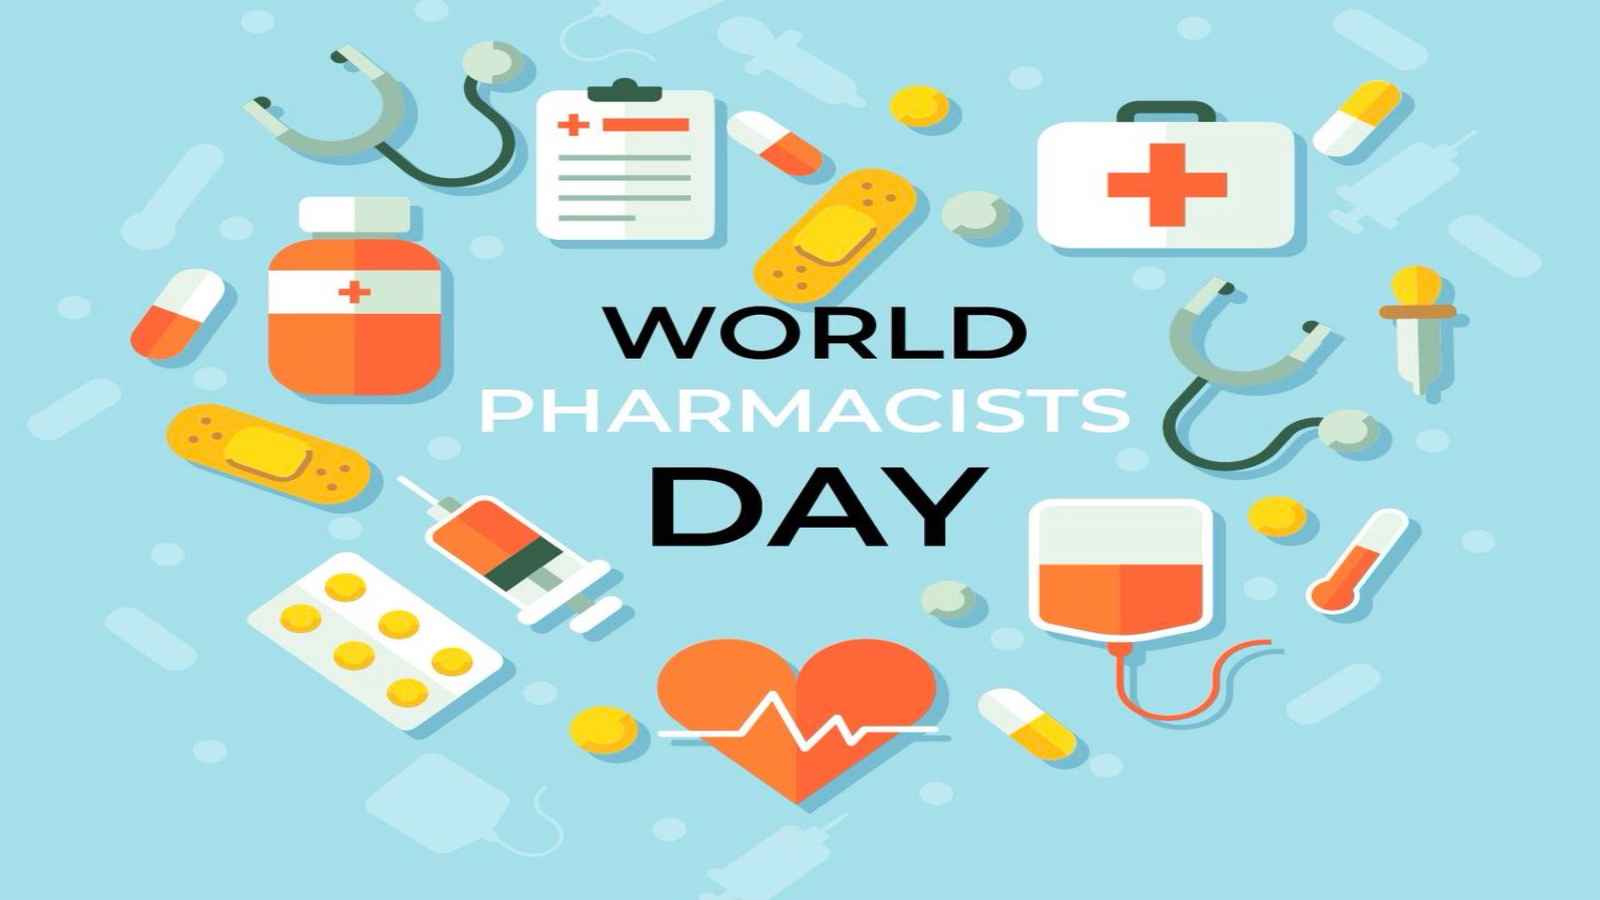 World Pharmacists Day 2022: Date, History and main objectives